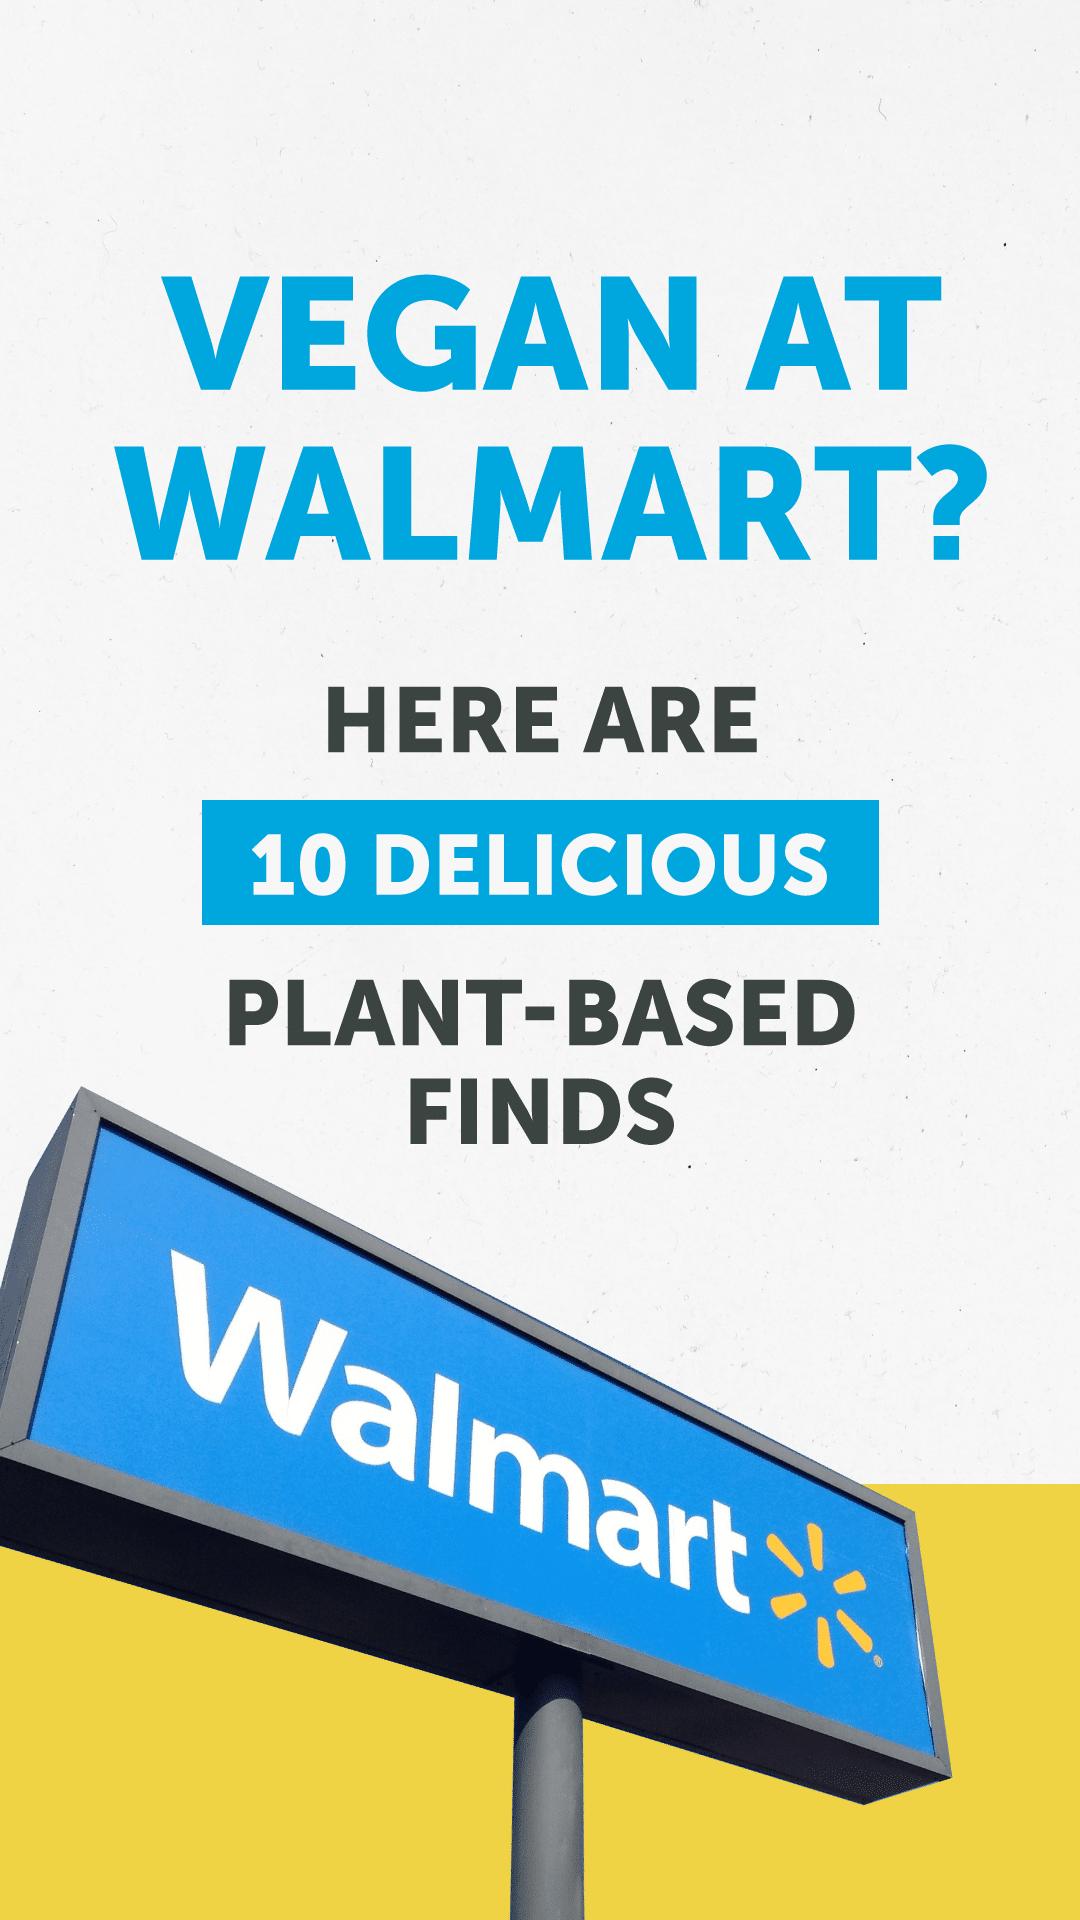 Vegan at Walmart? Here Are 10 Delicious Plant-Based Finds